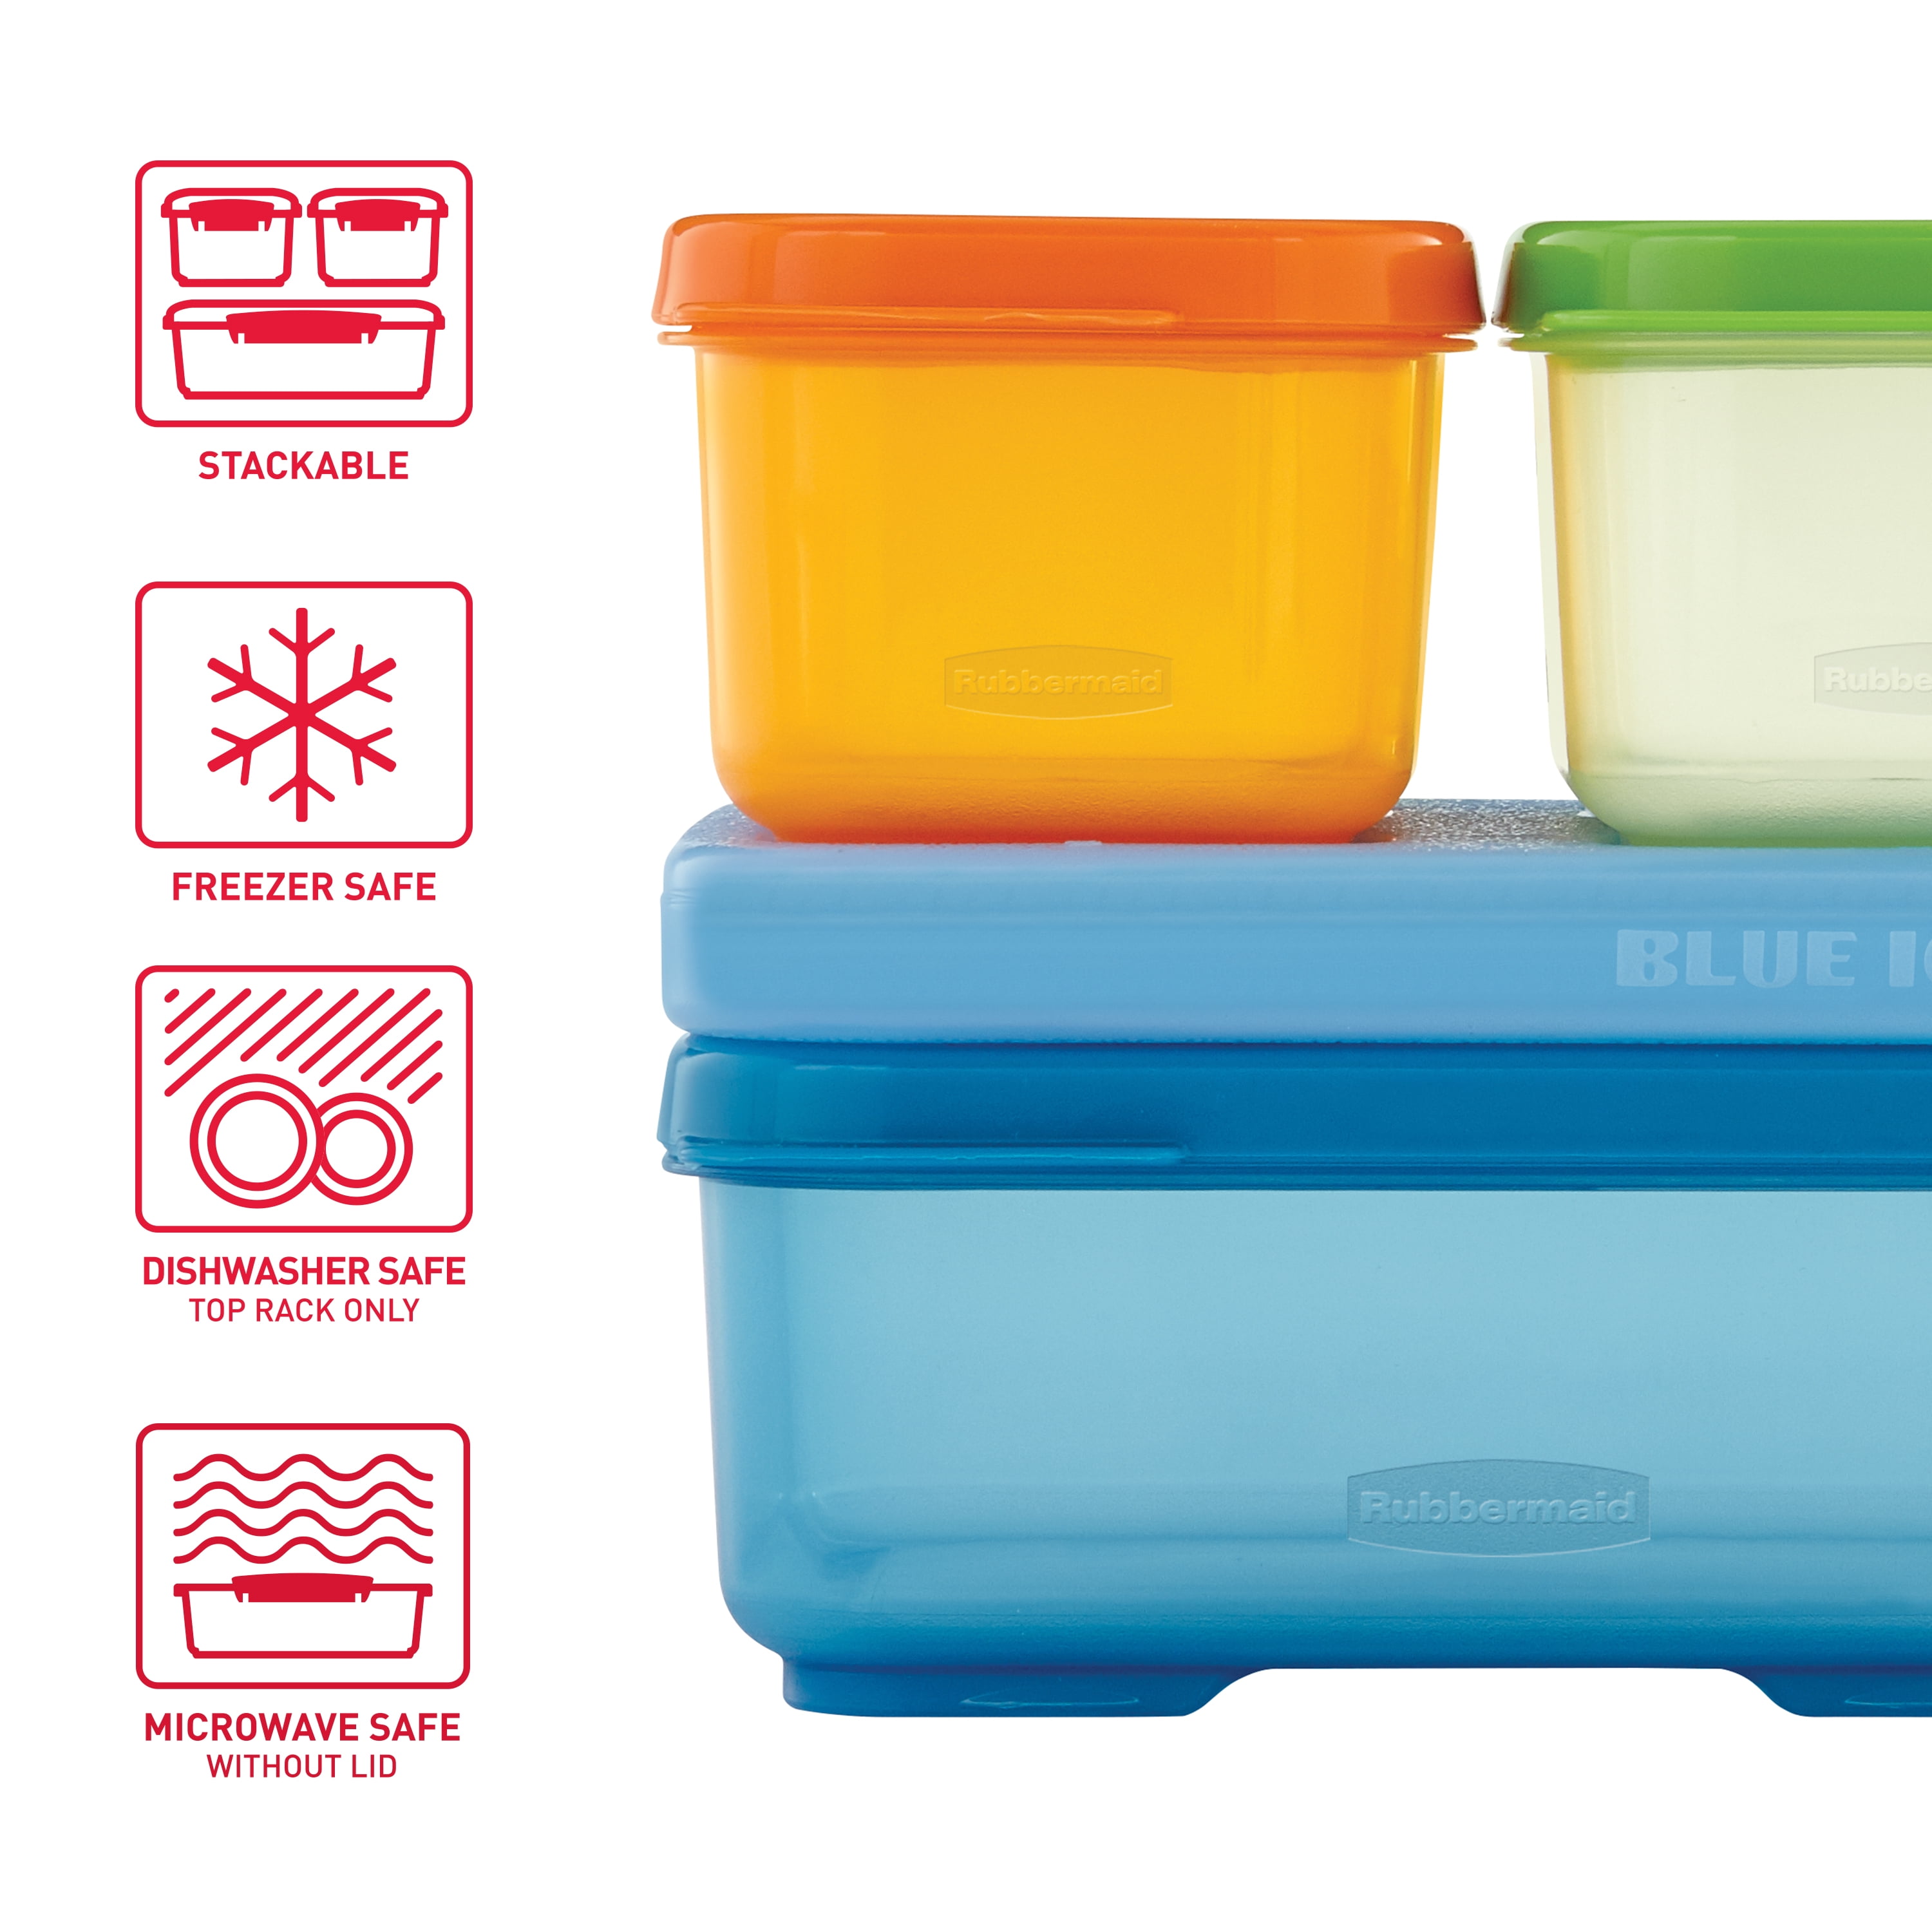 Rubbermaid LunchBlox Review: Our Lunch Box Review